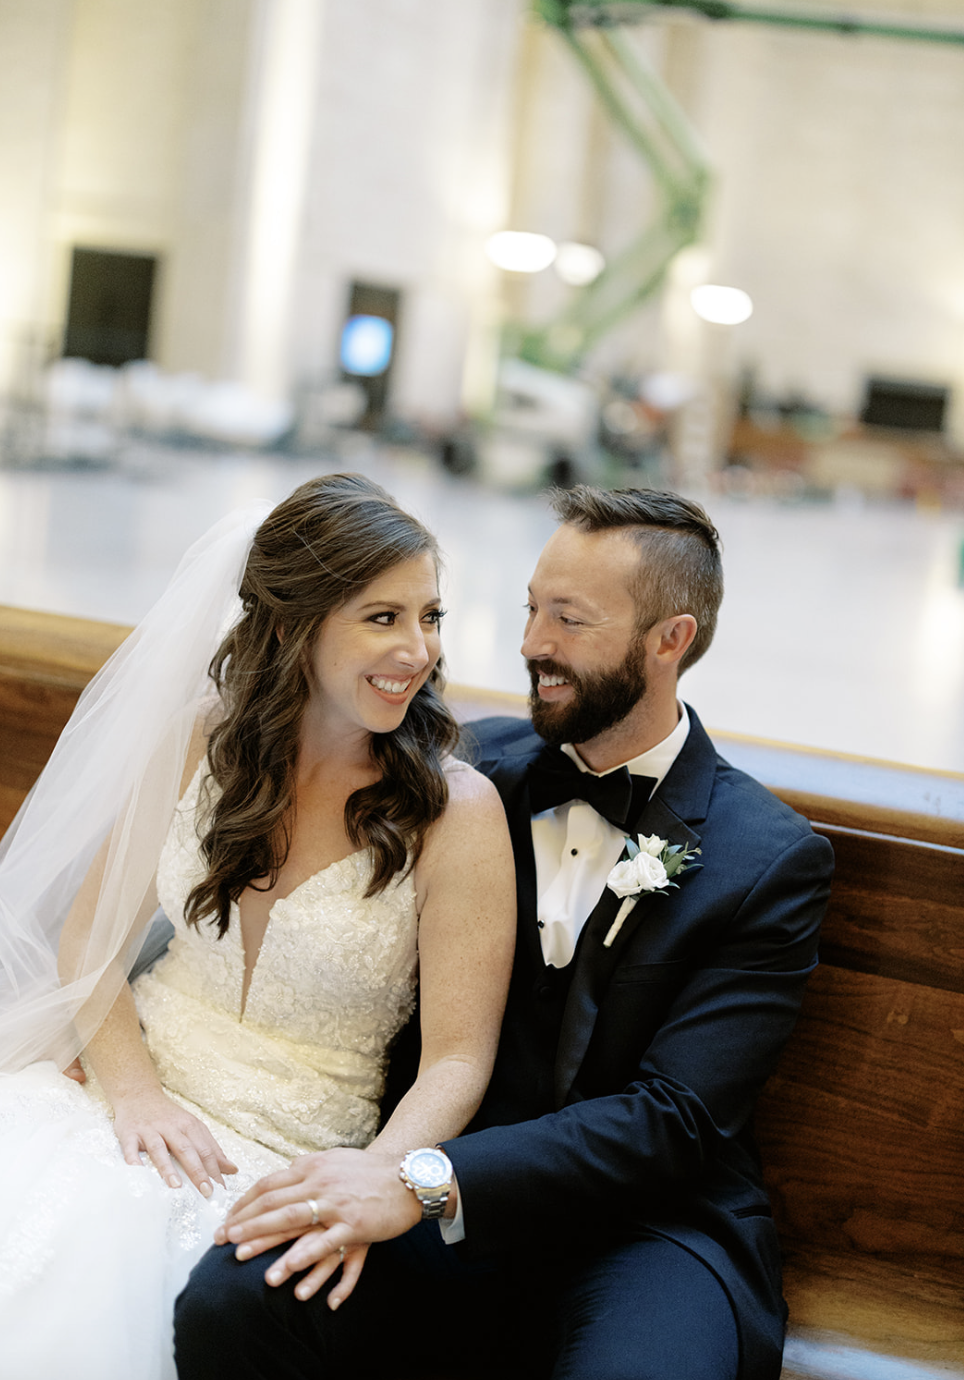 Chicago bride and groom sit on a wooden bench holding hands and smiling at each other.